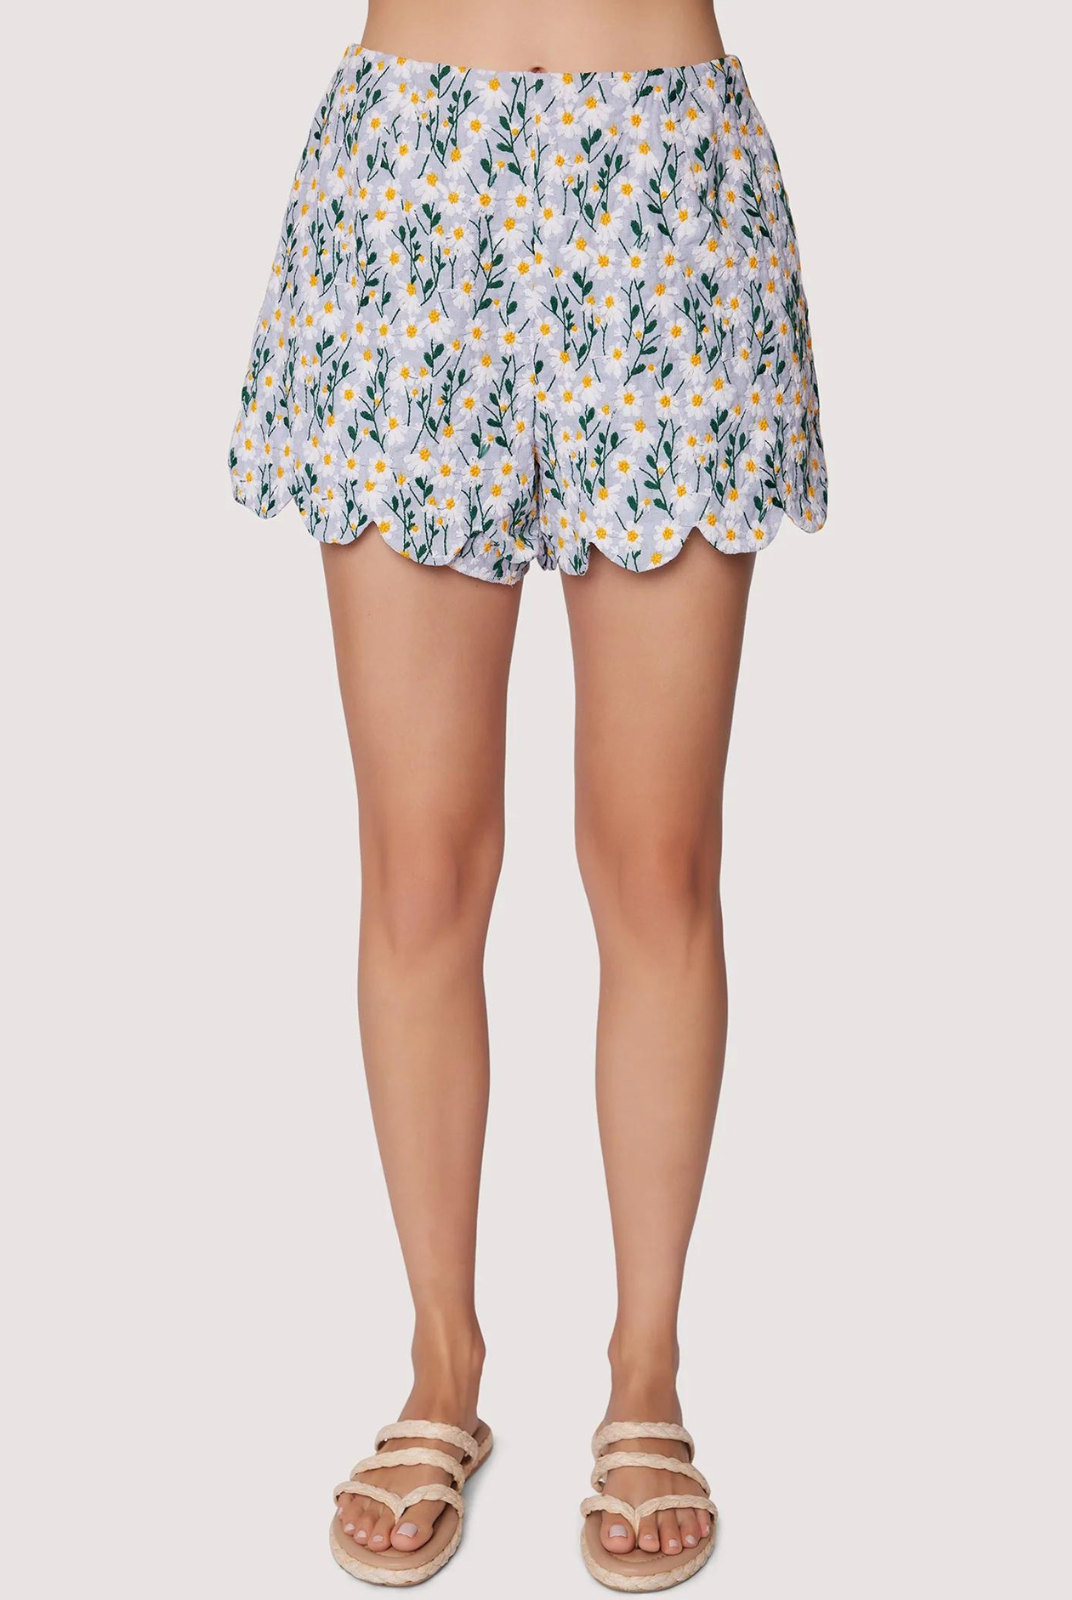 Lost + Wander Breath Of Youth Scallop Shorts. Introducing the Breath Of Youth Scallop Shorts, These floral embroidered shorts feature a delicate scallop detail and convenient side pockets. Made with a lightweight cotton blend fabric, these shorts are the perfect addition to your spring wardrobe.